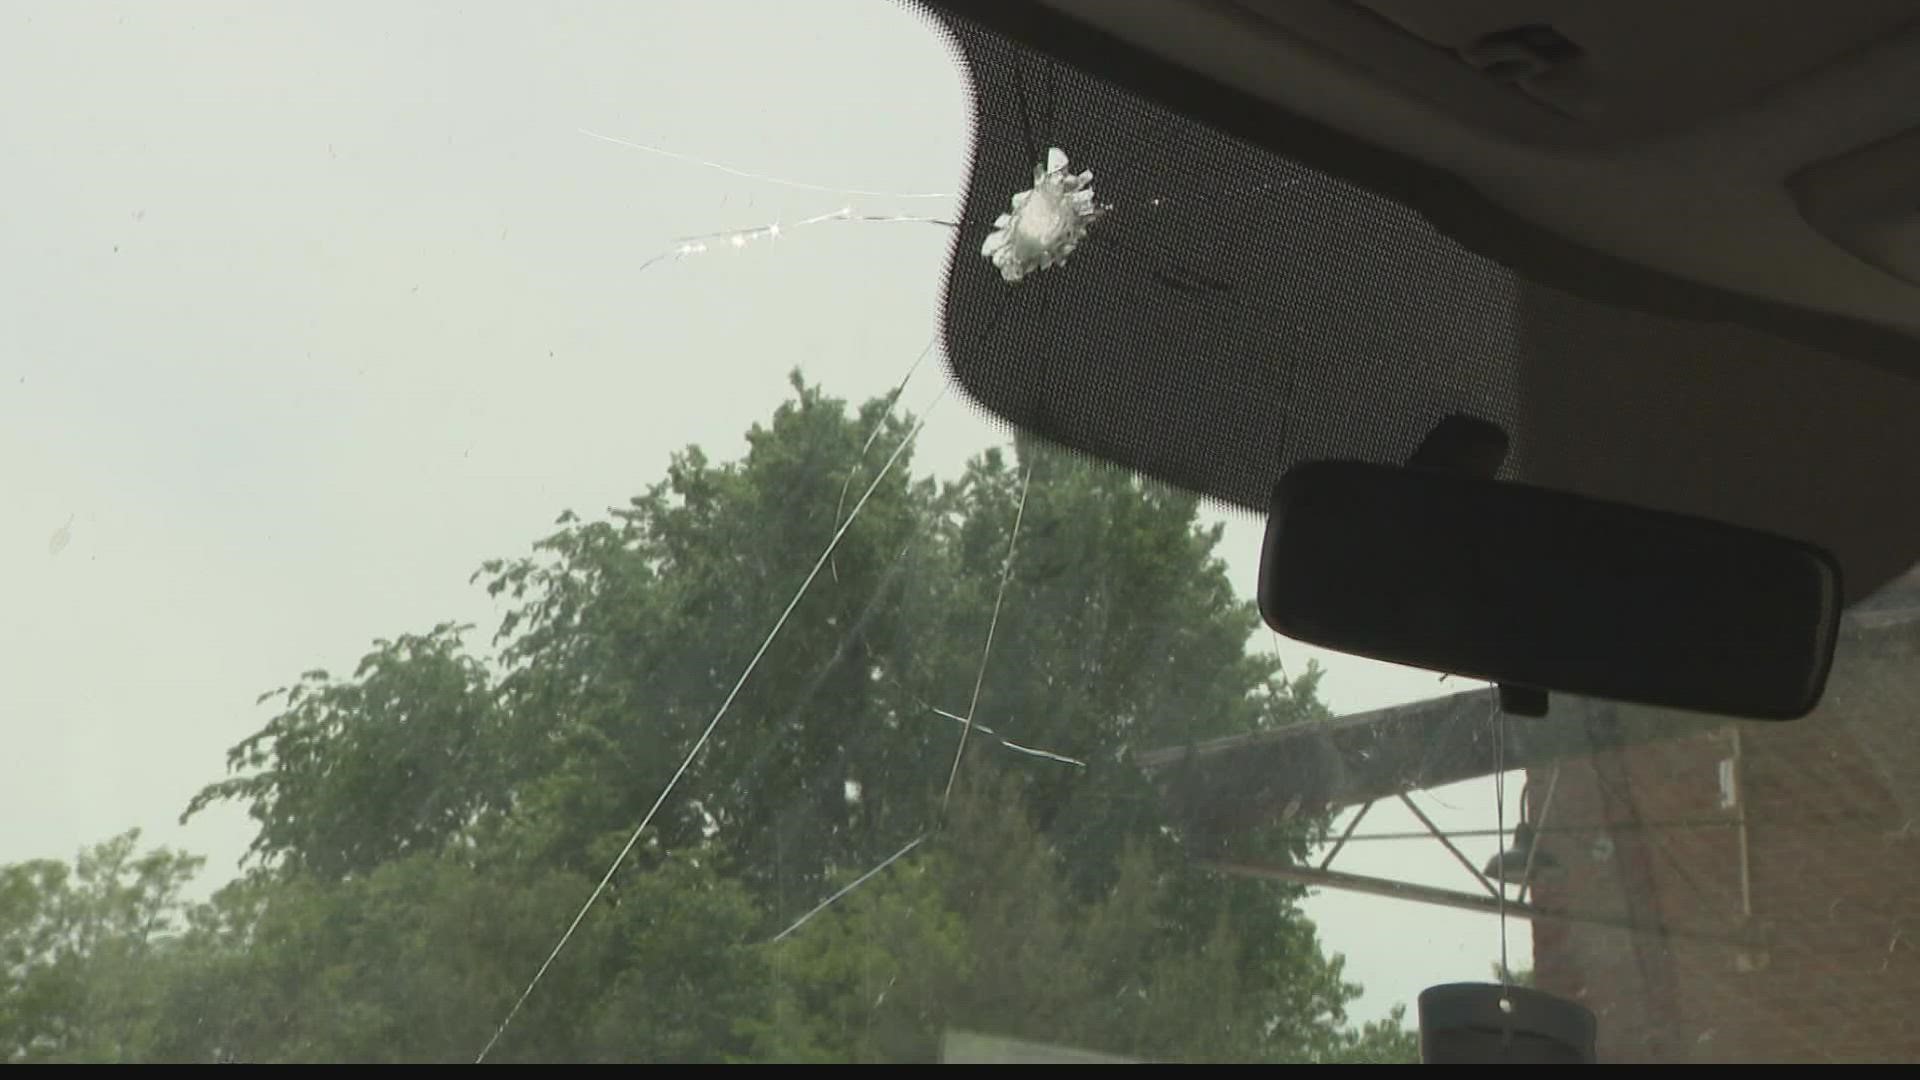 The women were heading eastbound on I-70 toward Illinois when the windshield was shattered.